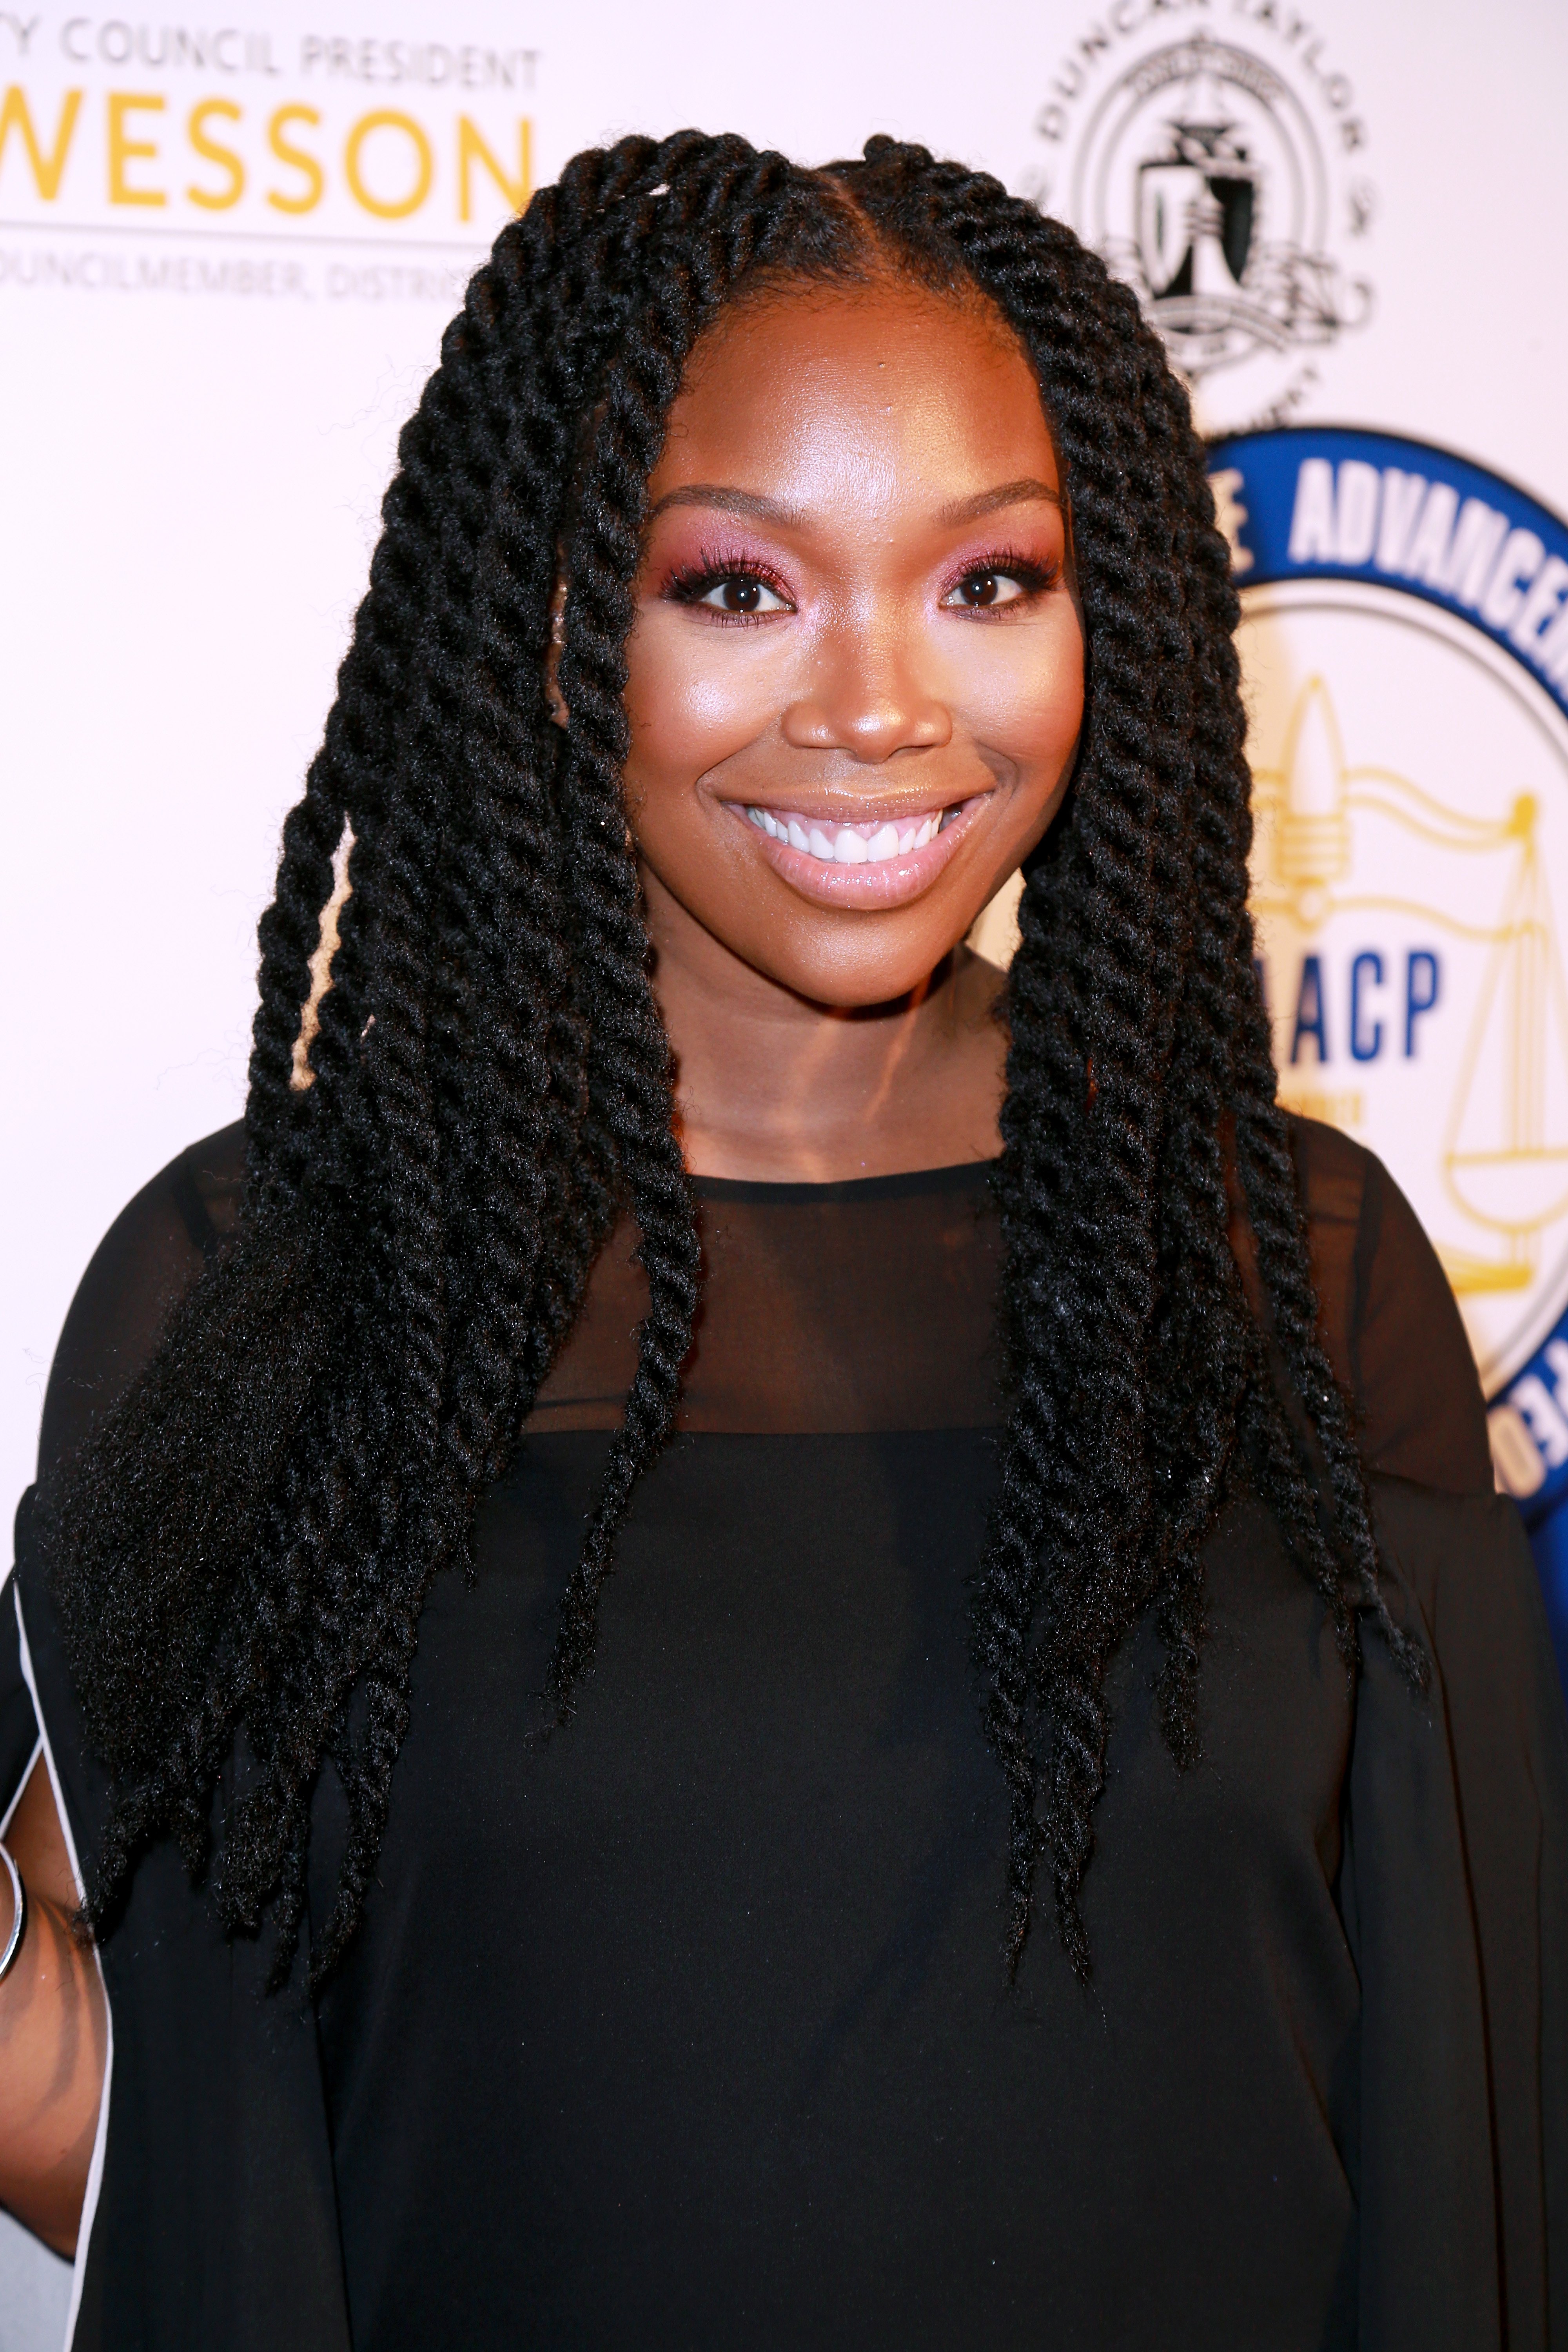 Brandy Norwood at the 27th Annual NAACP Awards in February 2018. | Photo: Getty Images